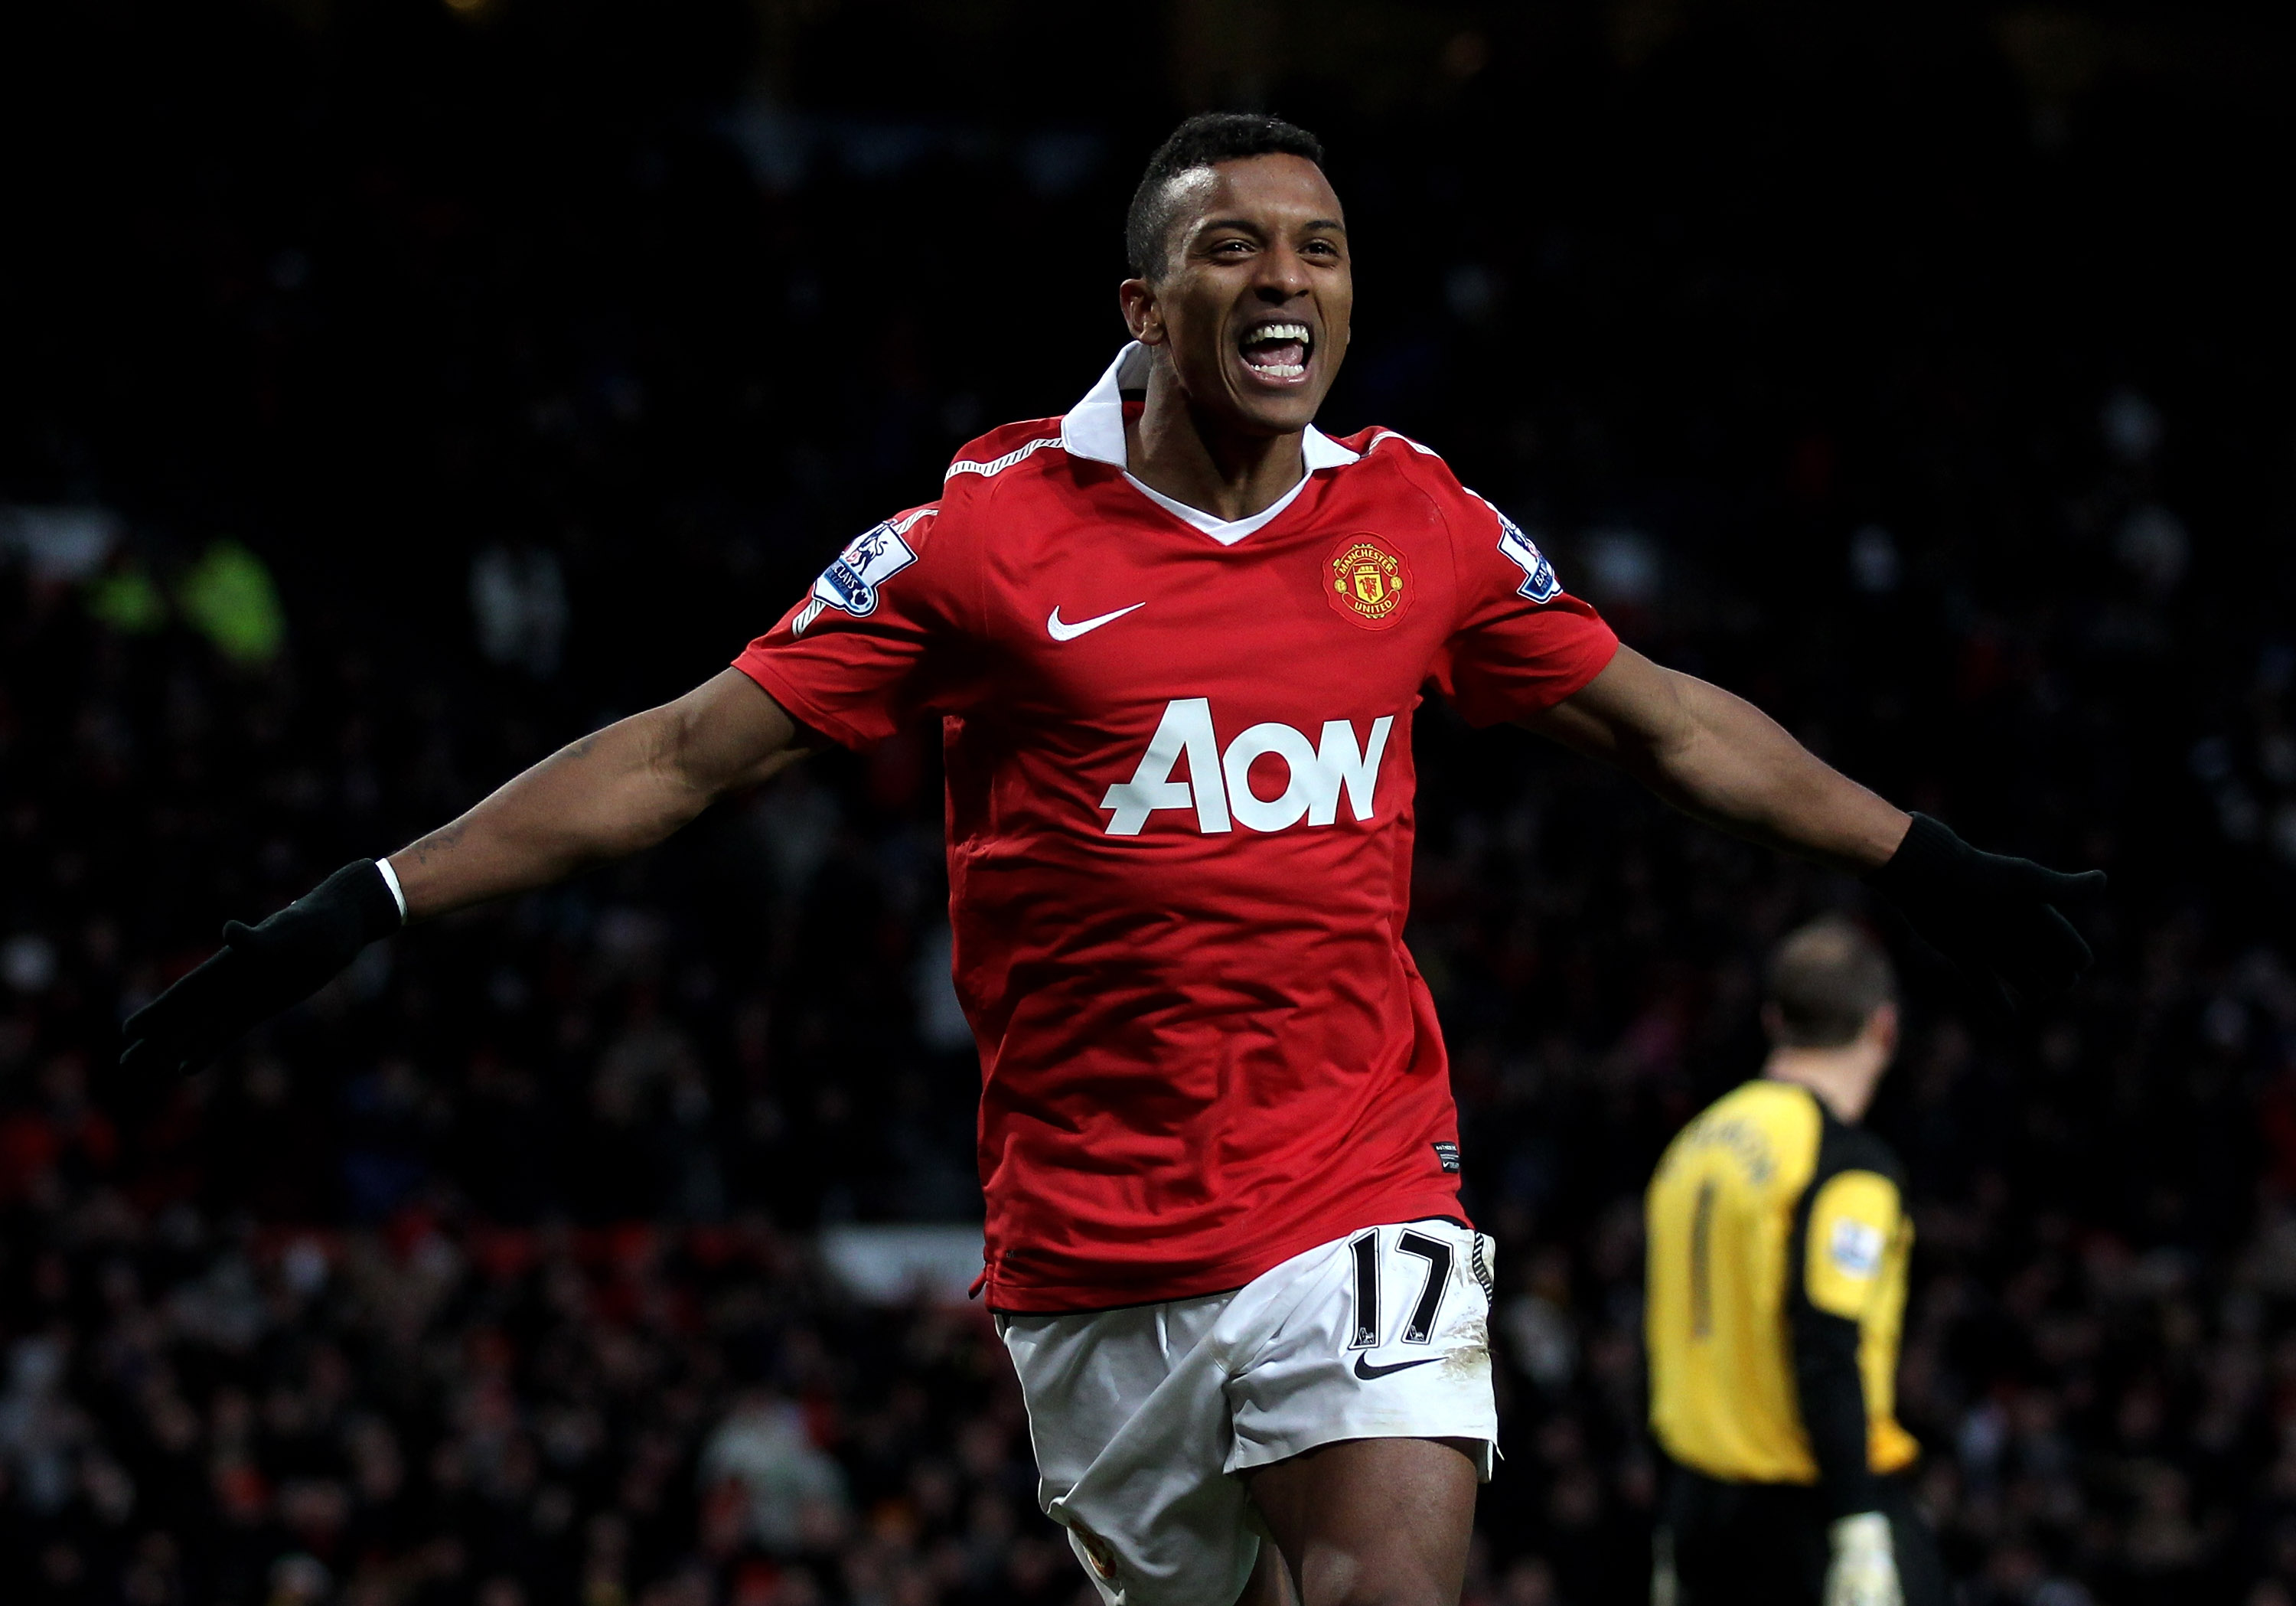 MANCHESTER, ENGLAND - NOVEMBER 27:  Nani of Manchester United celebrates scoring his team's fifth goal during the Barclays Premier League match between Manchester United and Blackburn Rovers at Old Trafford on November 27, 2010 in Manchester, England.  (P